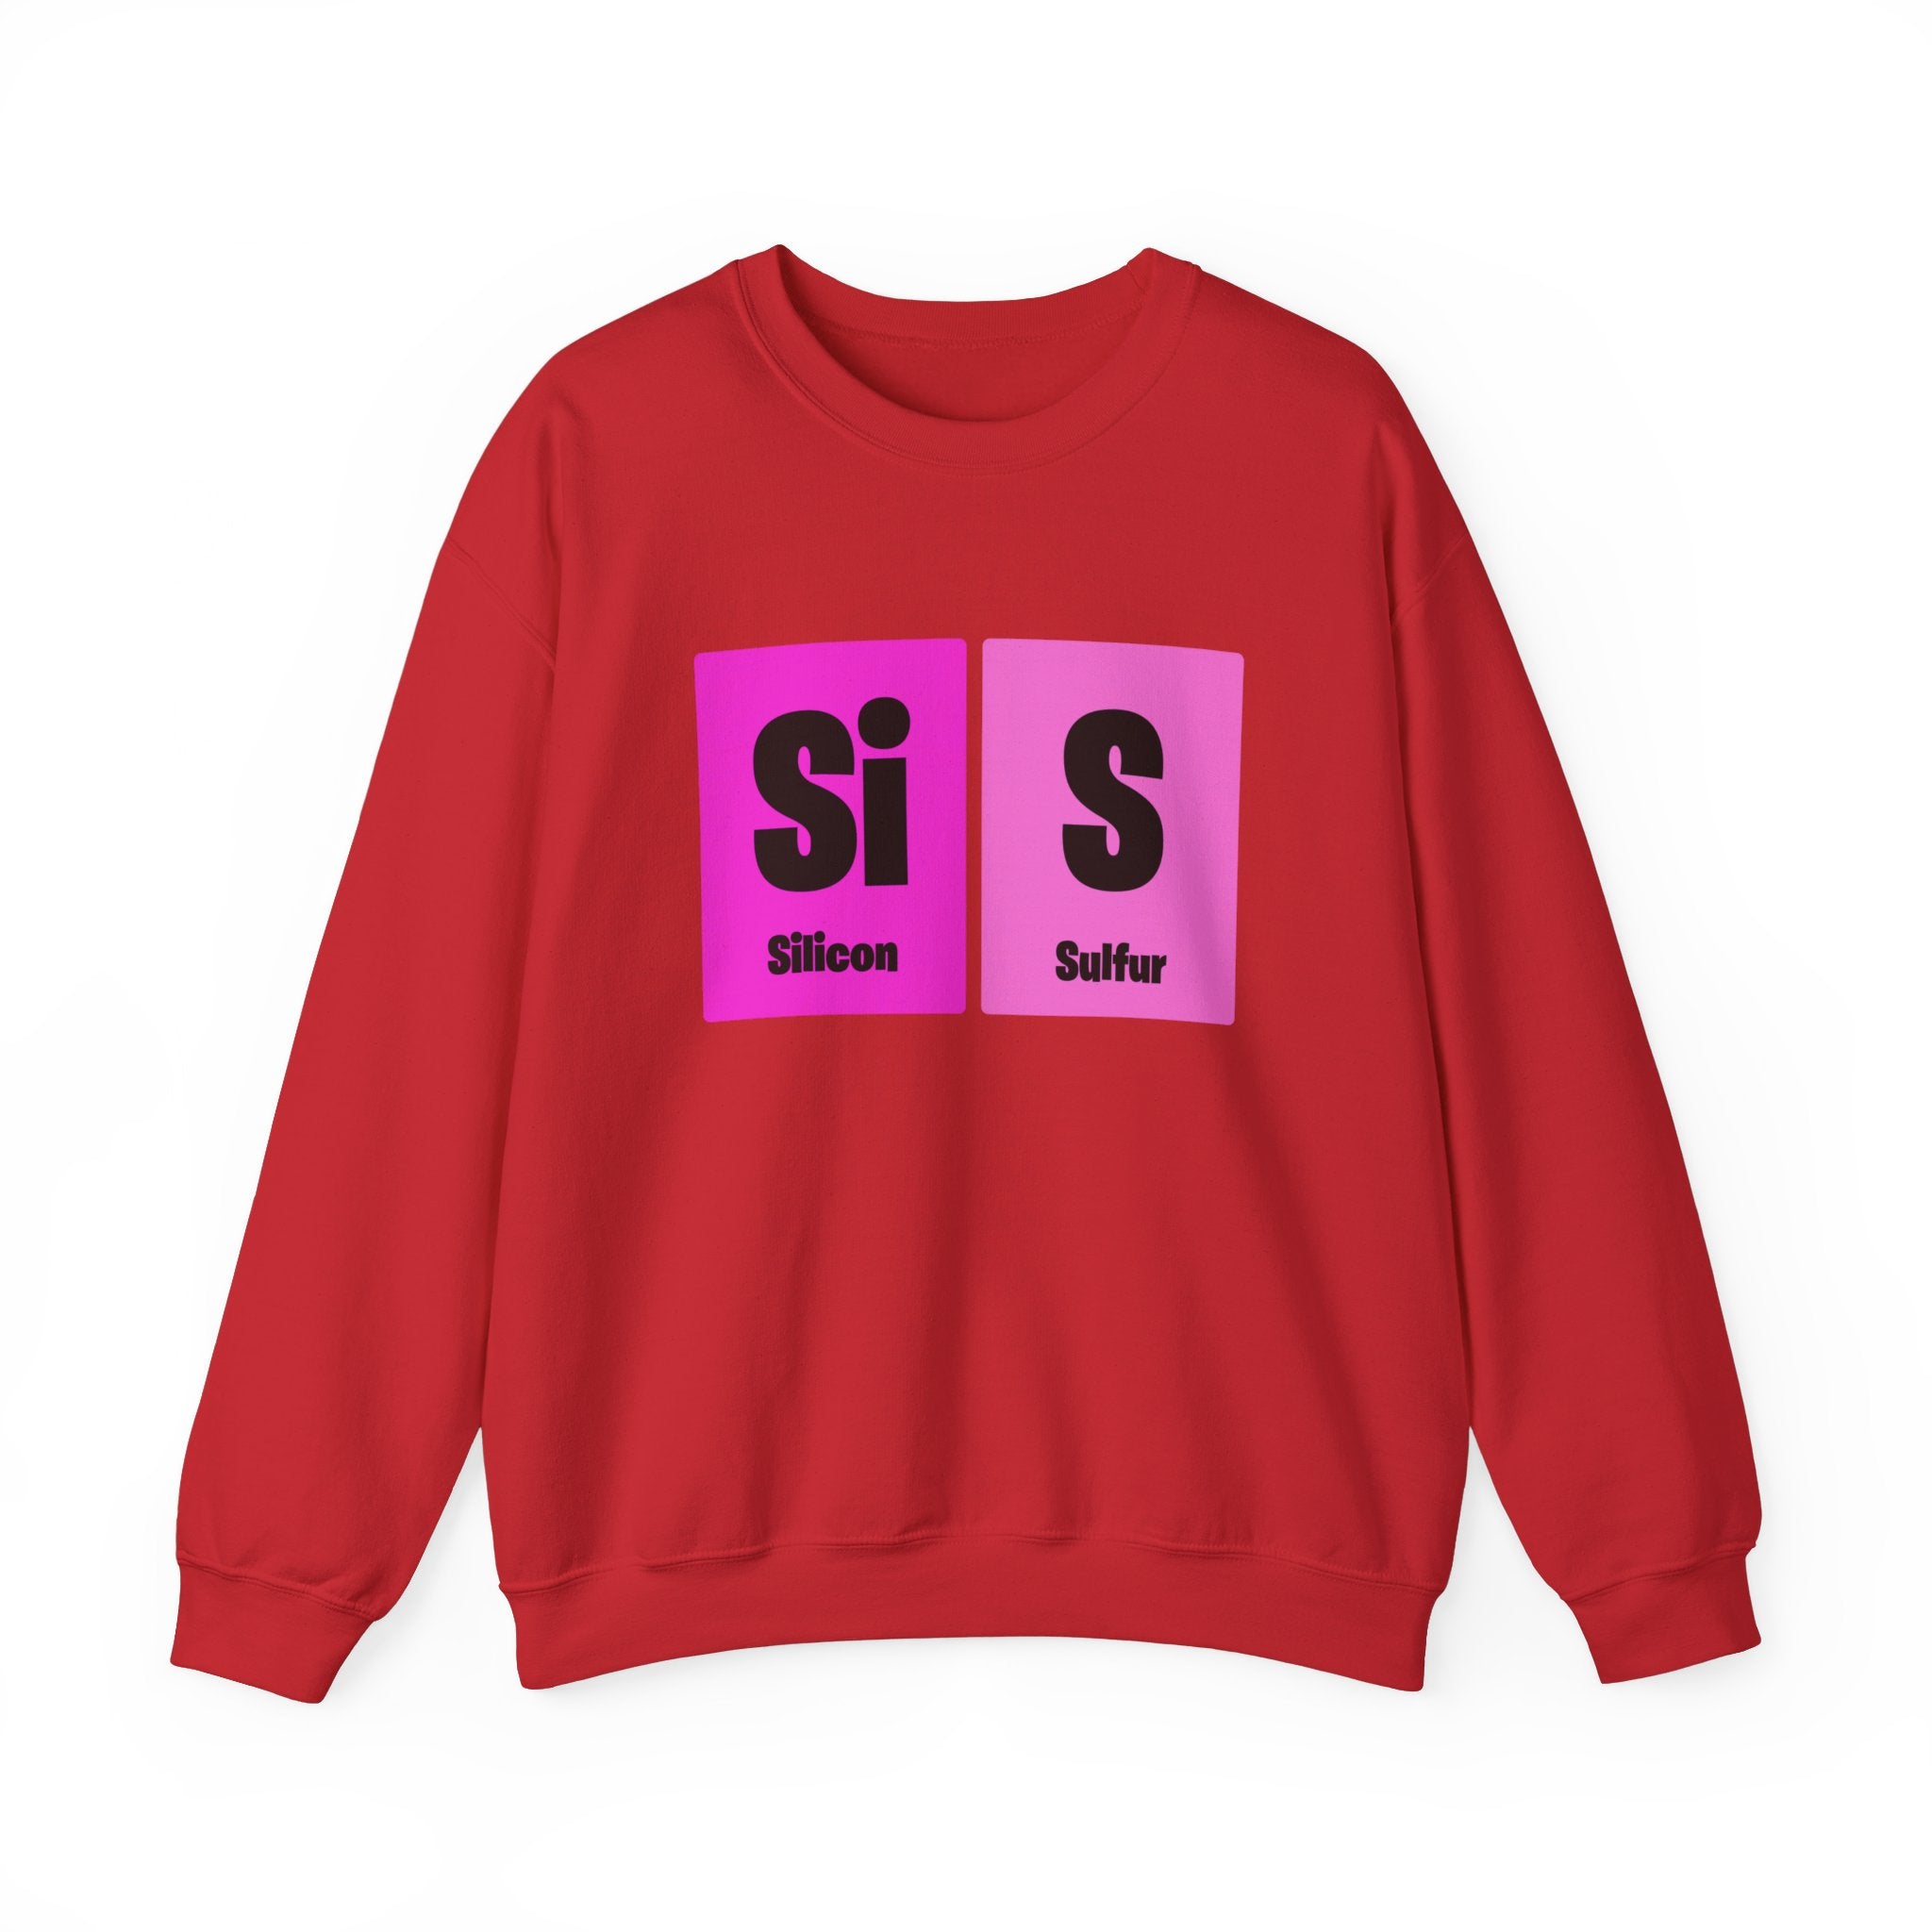 A red Si-S Light Pendant - Sweatshirt with a design featuring two periodic table elements, Silicon (Si) and Sulfur (S), on a pink and purple background.